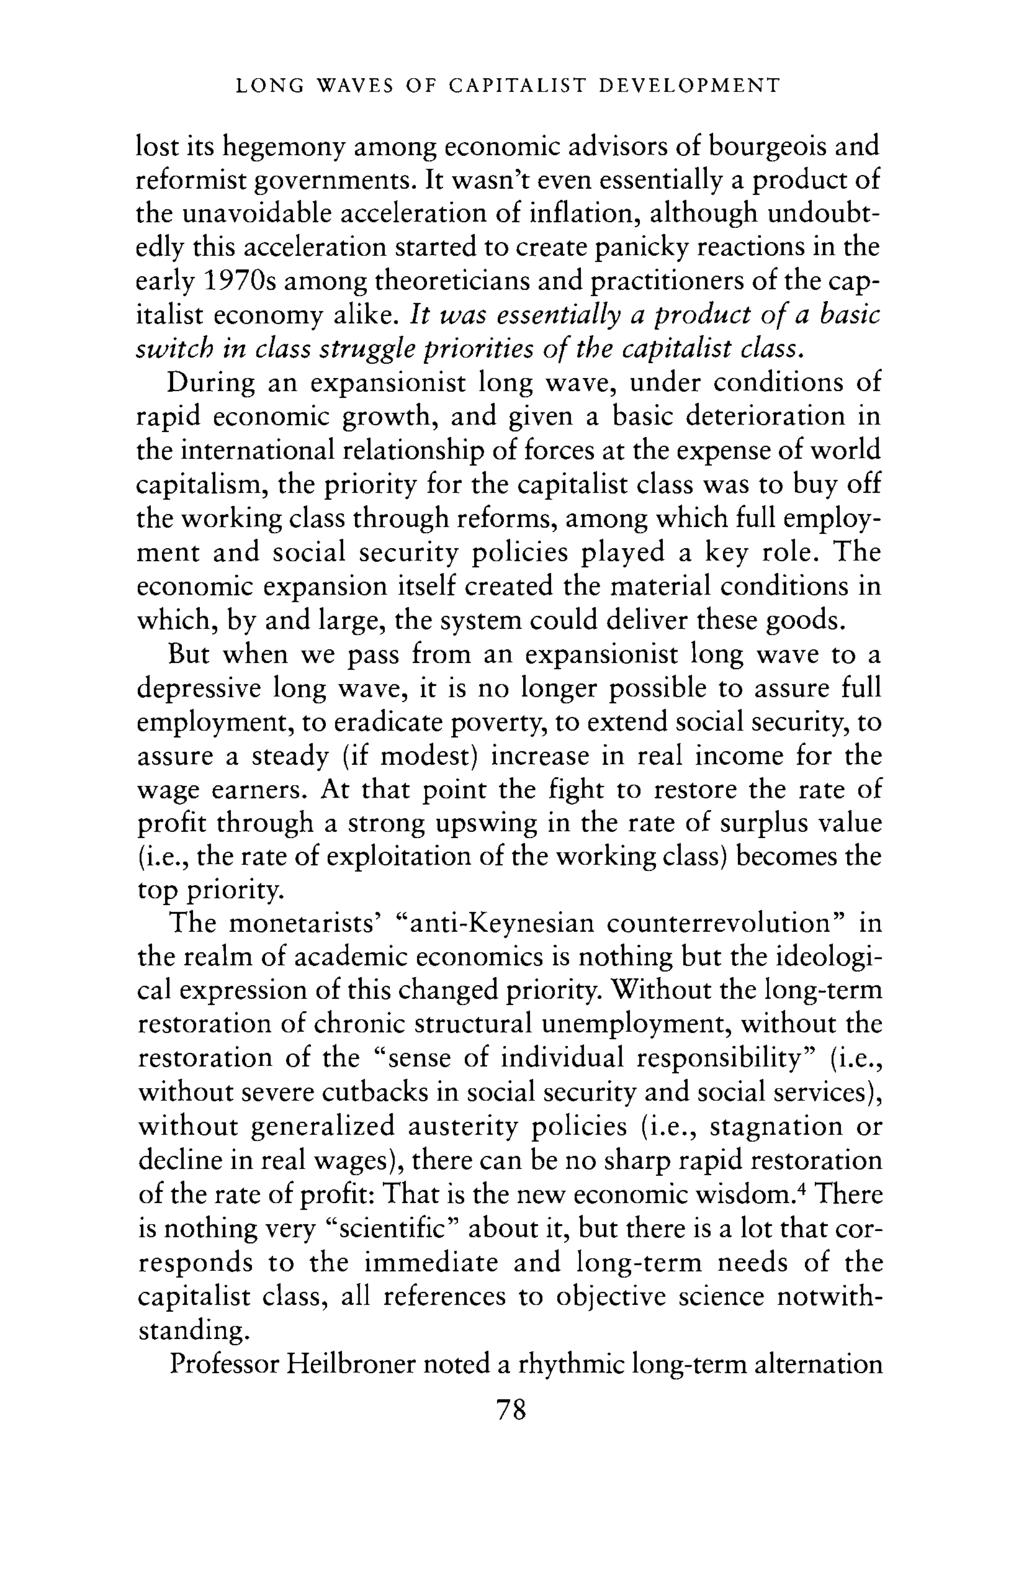 LONG WAVES OF CAPITALIST DEVELOPMENT lost its hegemony among economic advisors of bourgeois and reformist governments.